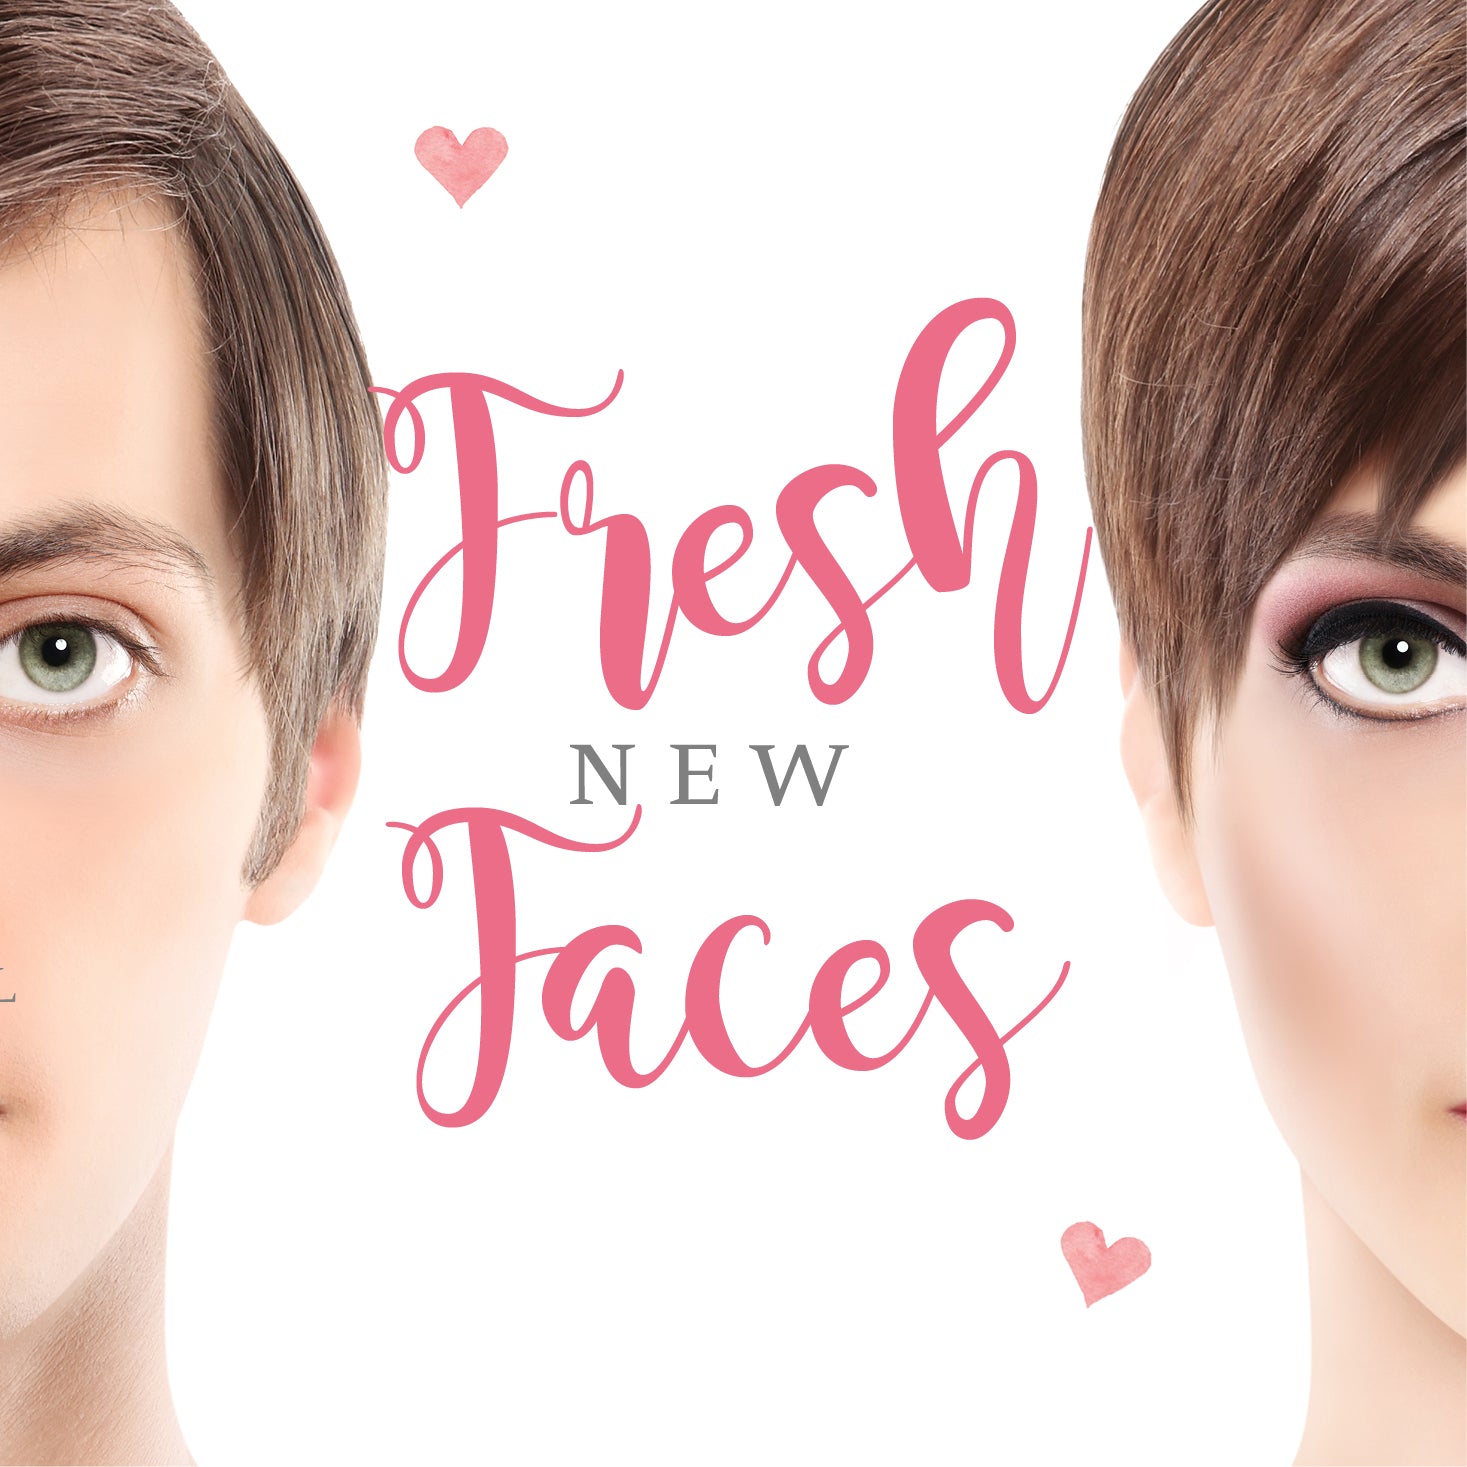 Fresh New Faces - Make-up Application